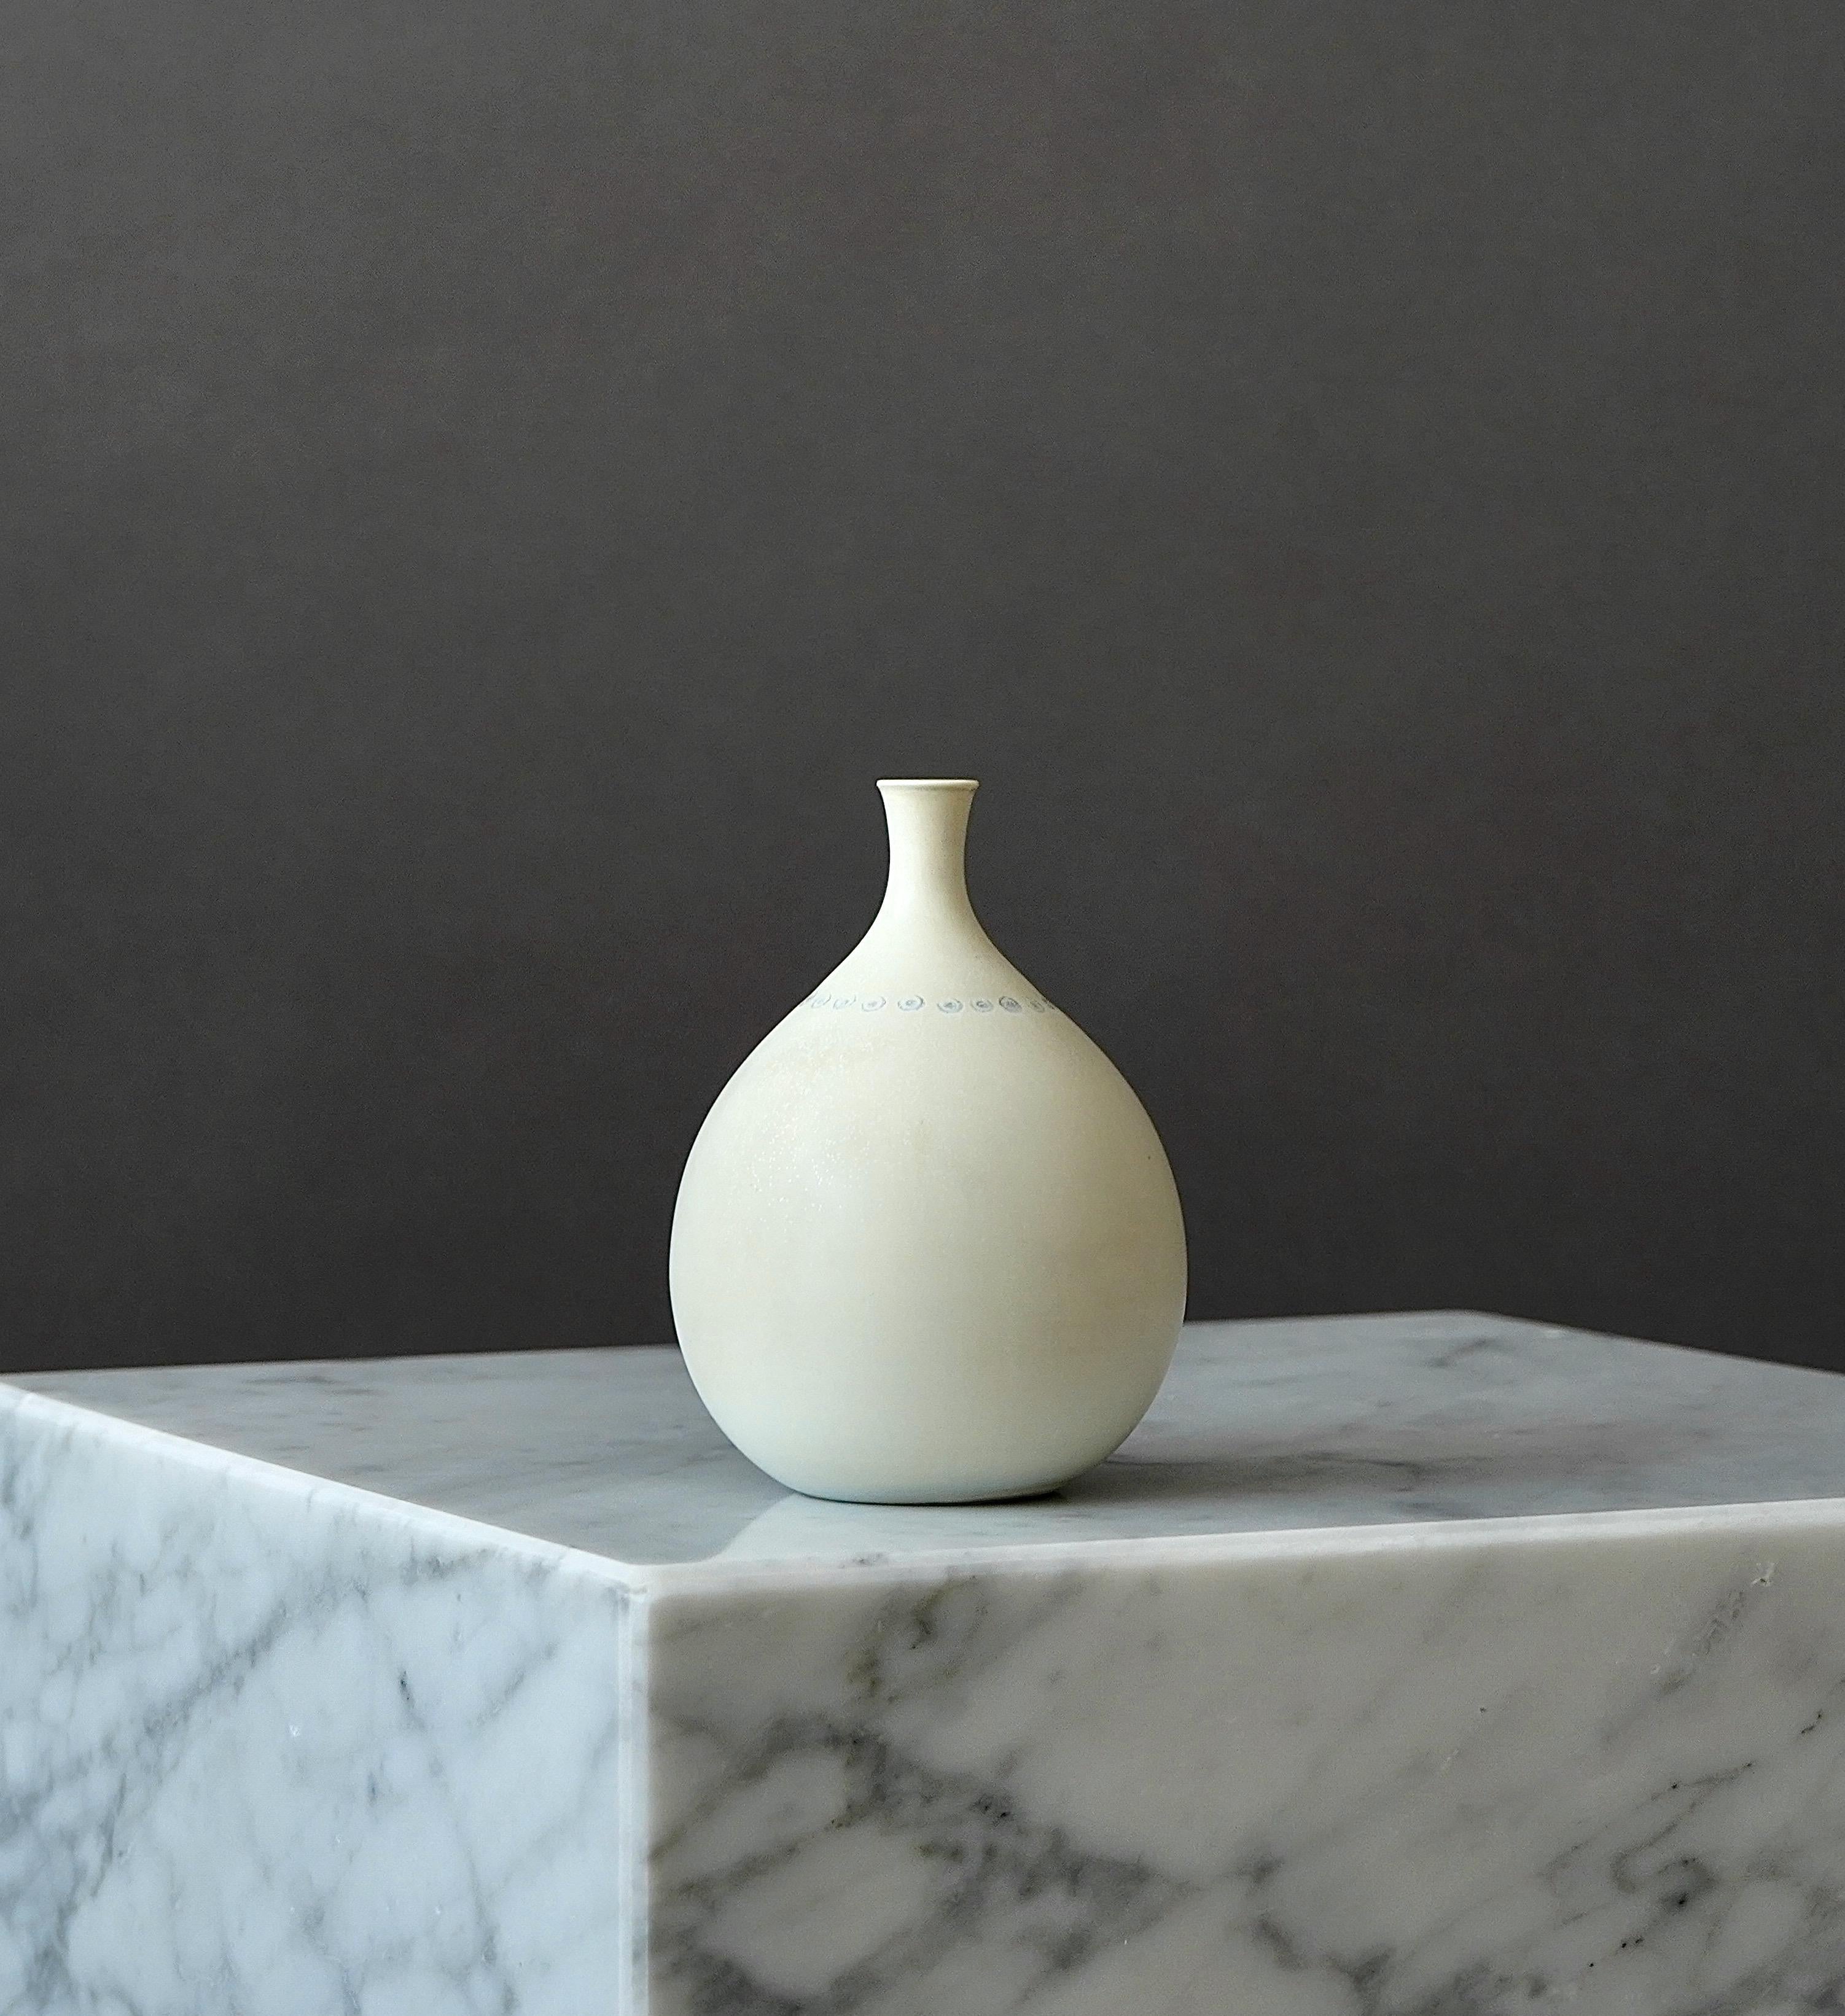 A beautiful and unique stoneware vase with amazing glaze.
Made by Stig Lindberg in Gustavsberg Studio, Sweden. 1960.

Excellent condition.
Incised 